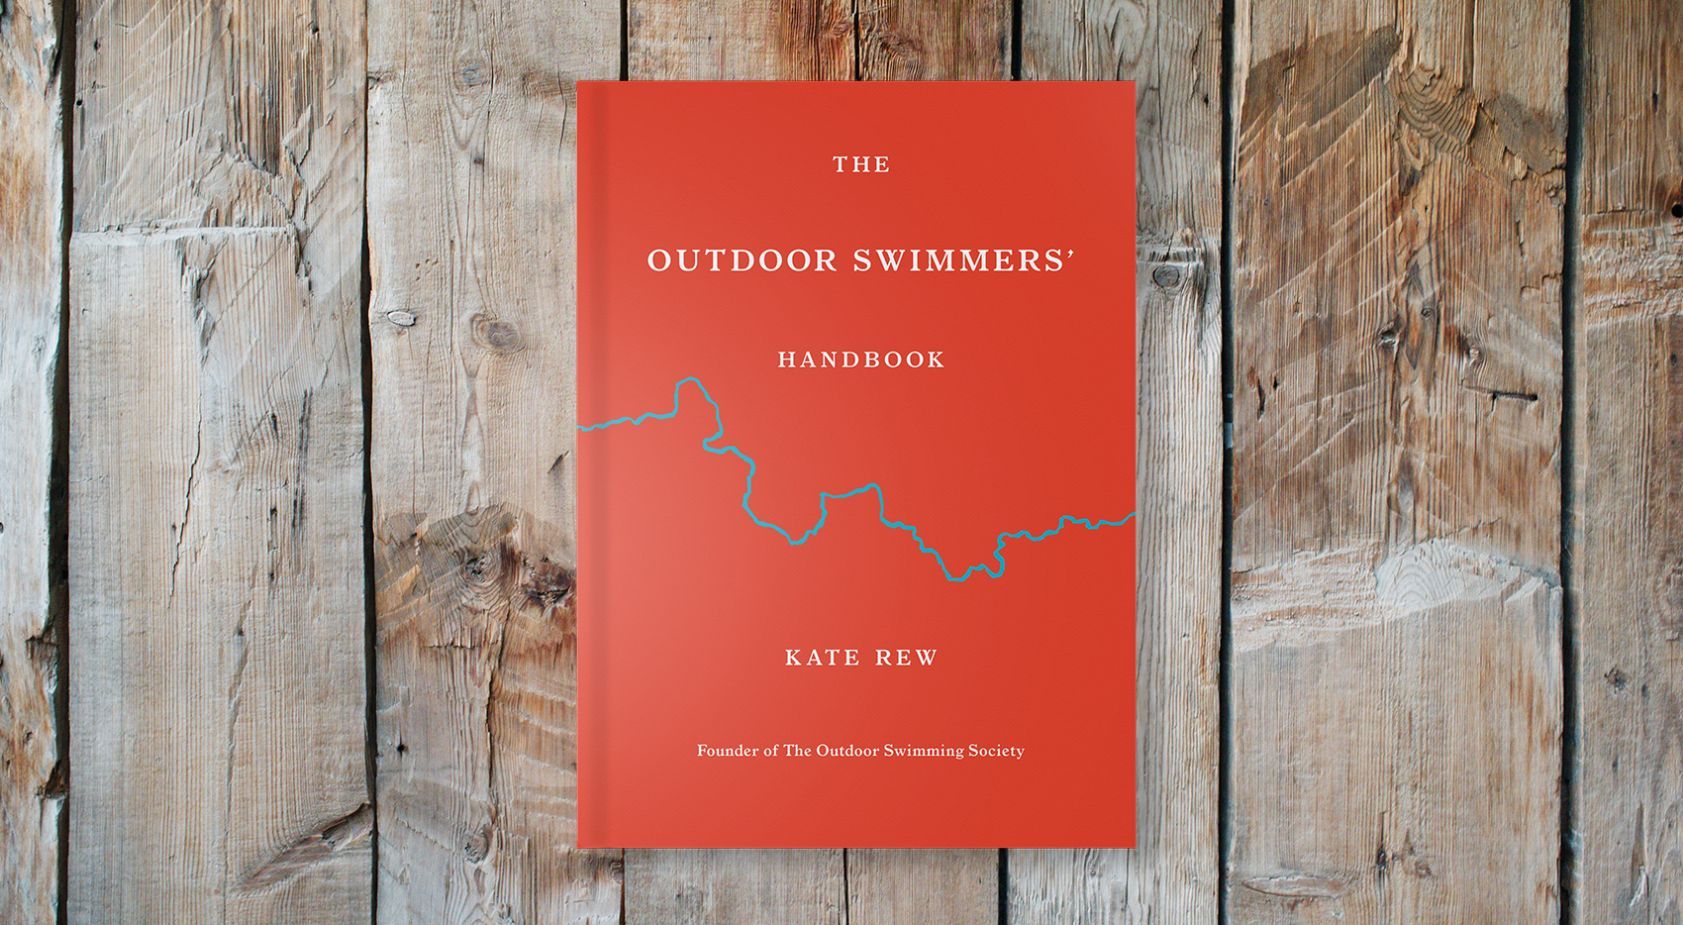 Book Club: Kate Rew - The Outdoor Swimmers’ Handbook